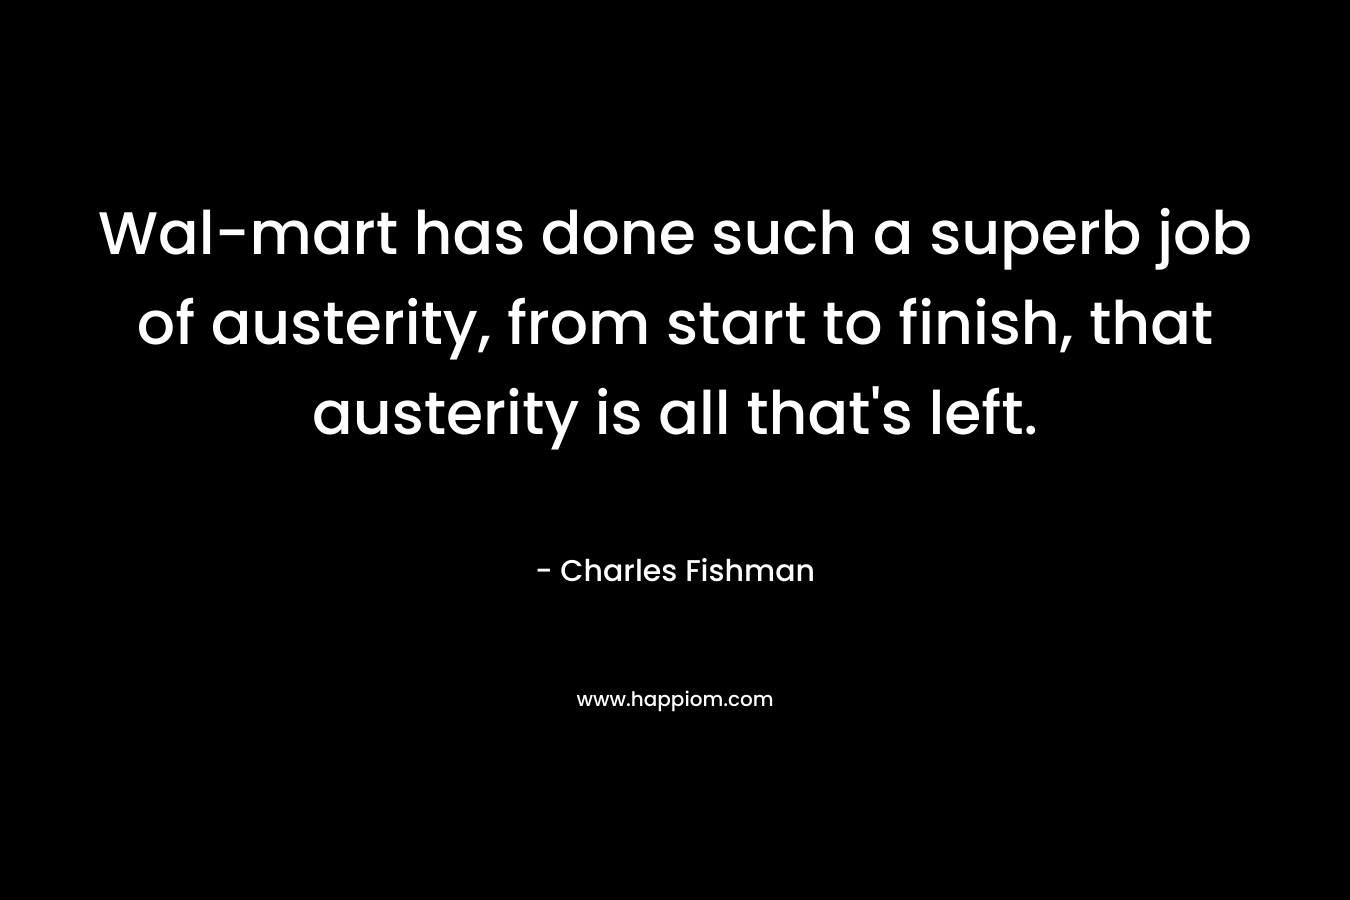 Wal-mart has done such a superb job of austerity, from start to finish, that austerity is all that’s left. – Charles Fishman